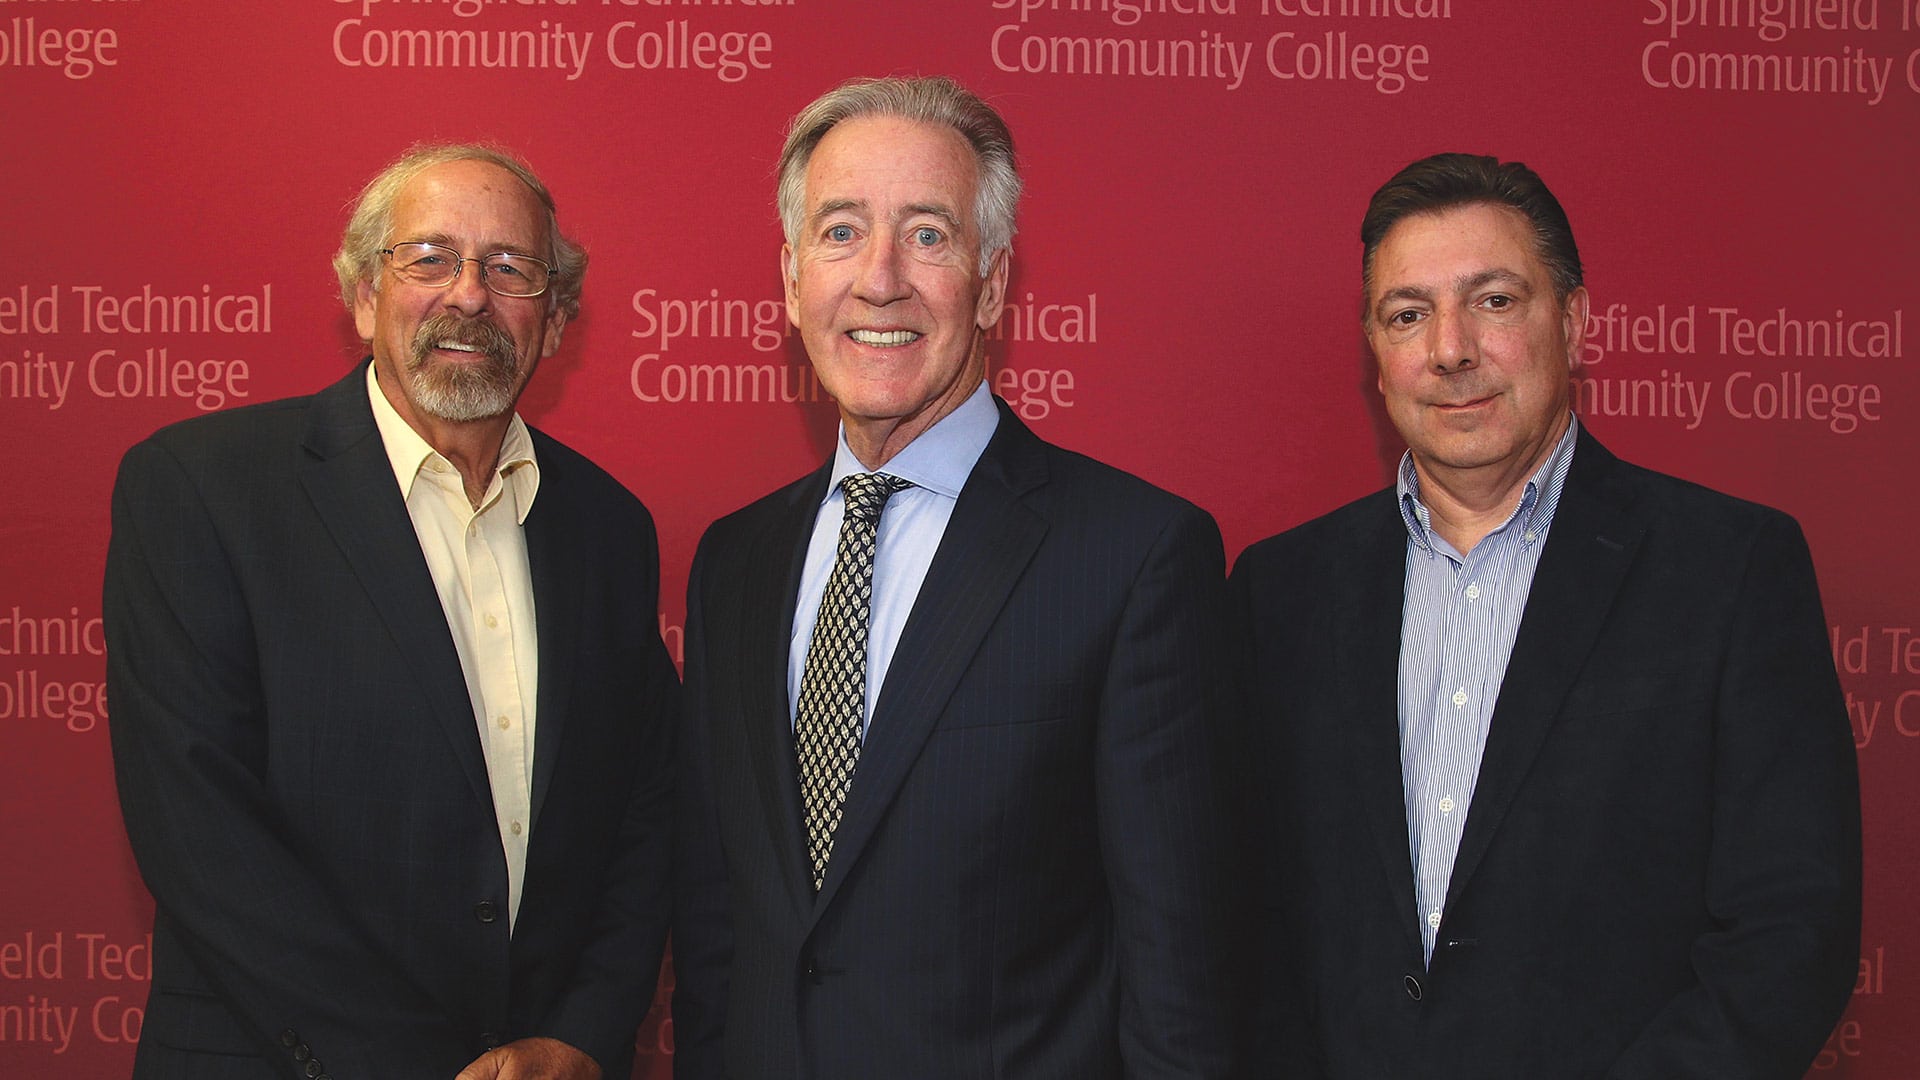 The National Science Foundation (NSF) awarded two separate grants to Springfield Technical Community College